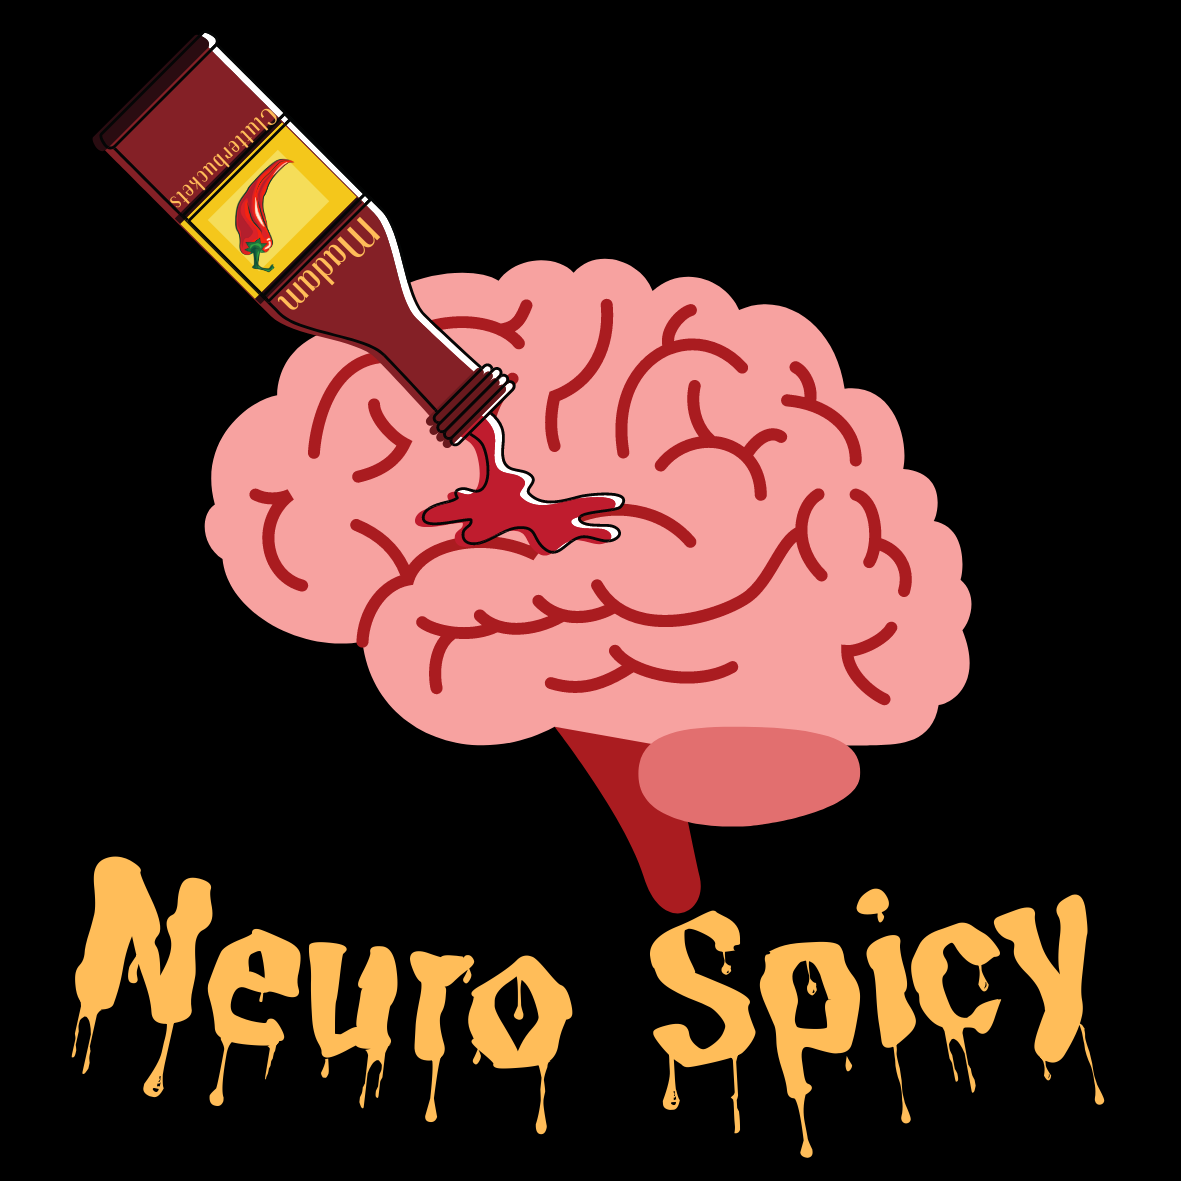 Neuro Spicy Full Color Logo Baseball Tee by Madam Clutterbucket's!